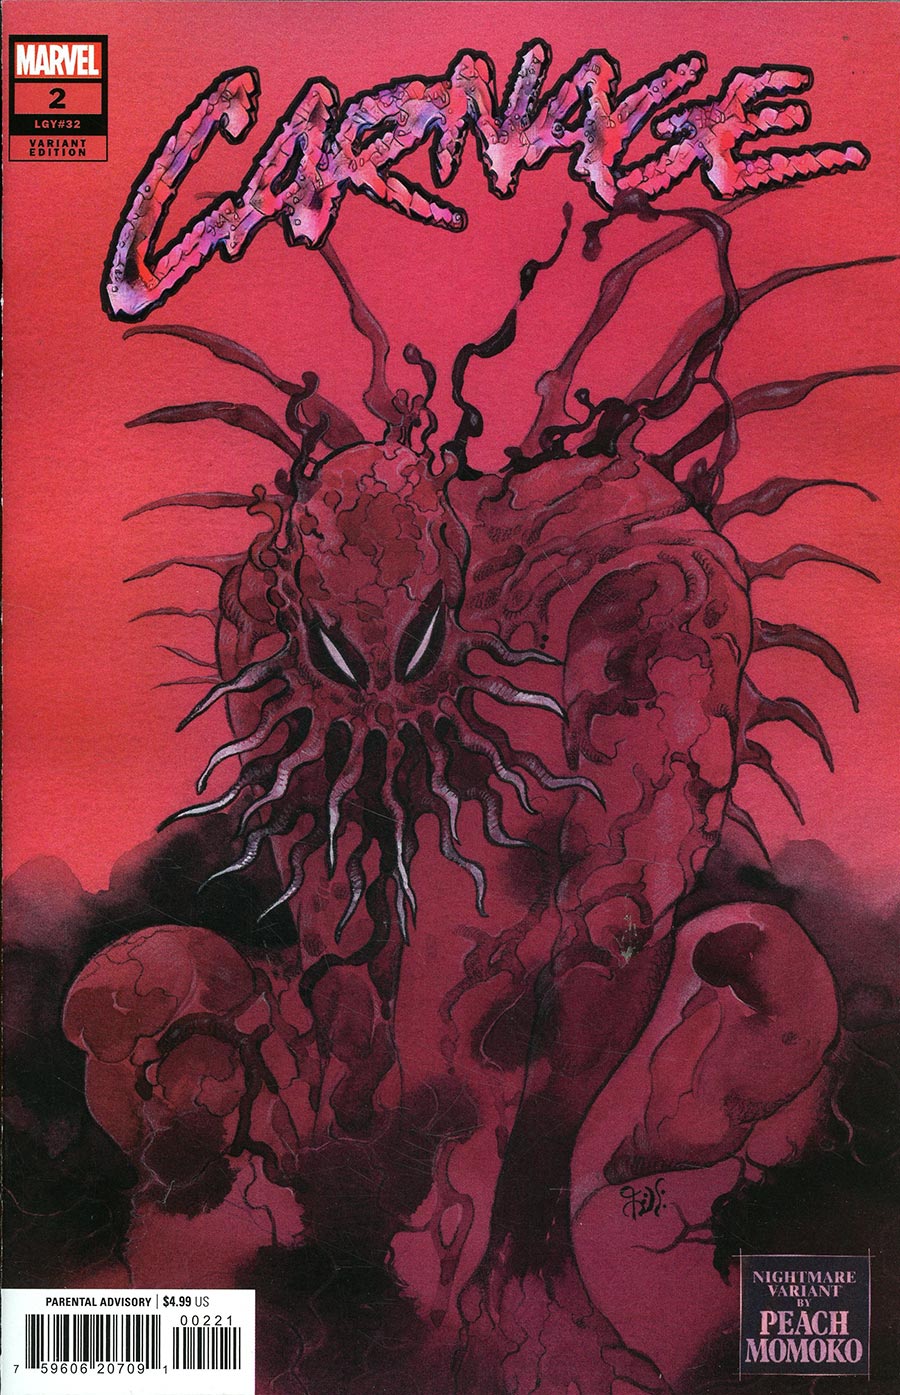 Carnage Vol 4 #2 Cover B Variant Peach Momoko Nightmare Cover